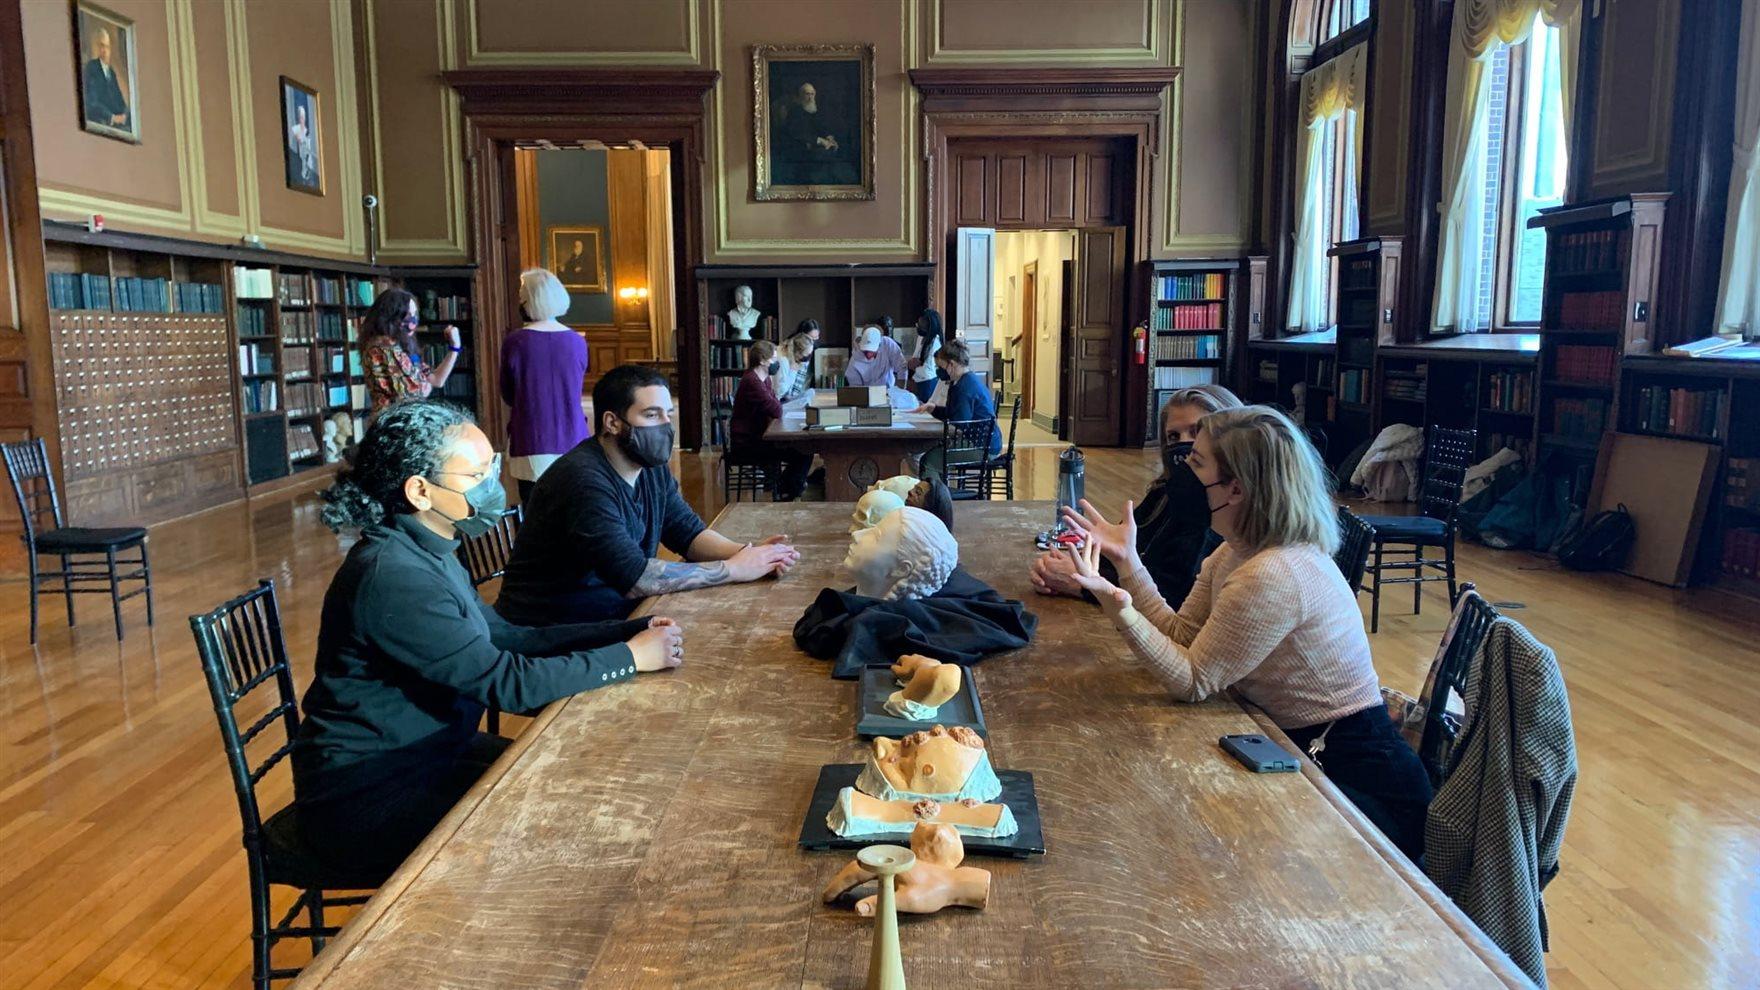 Students seated at a table during a class visit to the Mütter Museum that employed historic artifacts and discussions. Photo courtesy Jacqui Bowman.